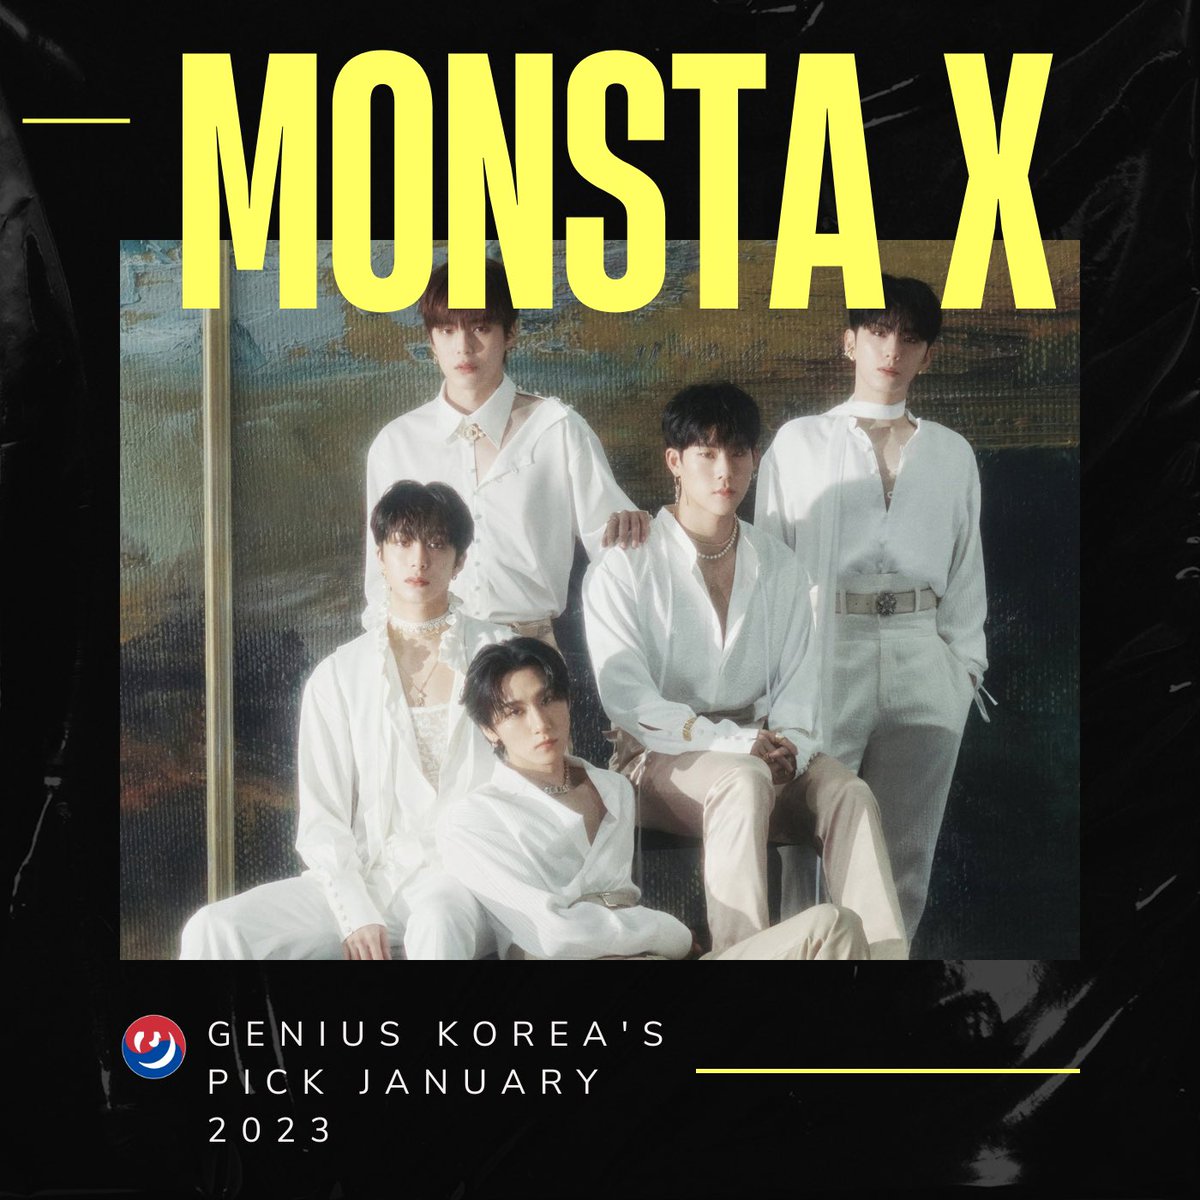 Genius Korea’s Pick for Artist of the Month goes to MONSTA X (@OfficialMonstaX) to celebrate their new envelope-pushing album #REASON! Check out the curated playlist here and follow us on Spotify! open.spotify.com/playlist/0PkIh…